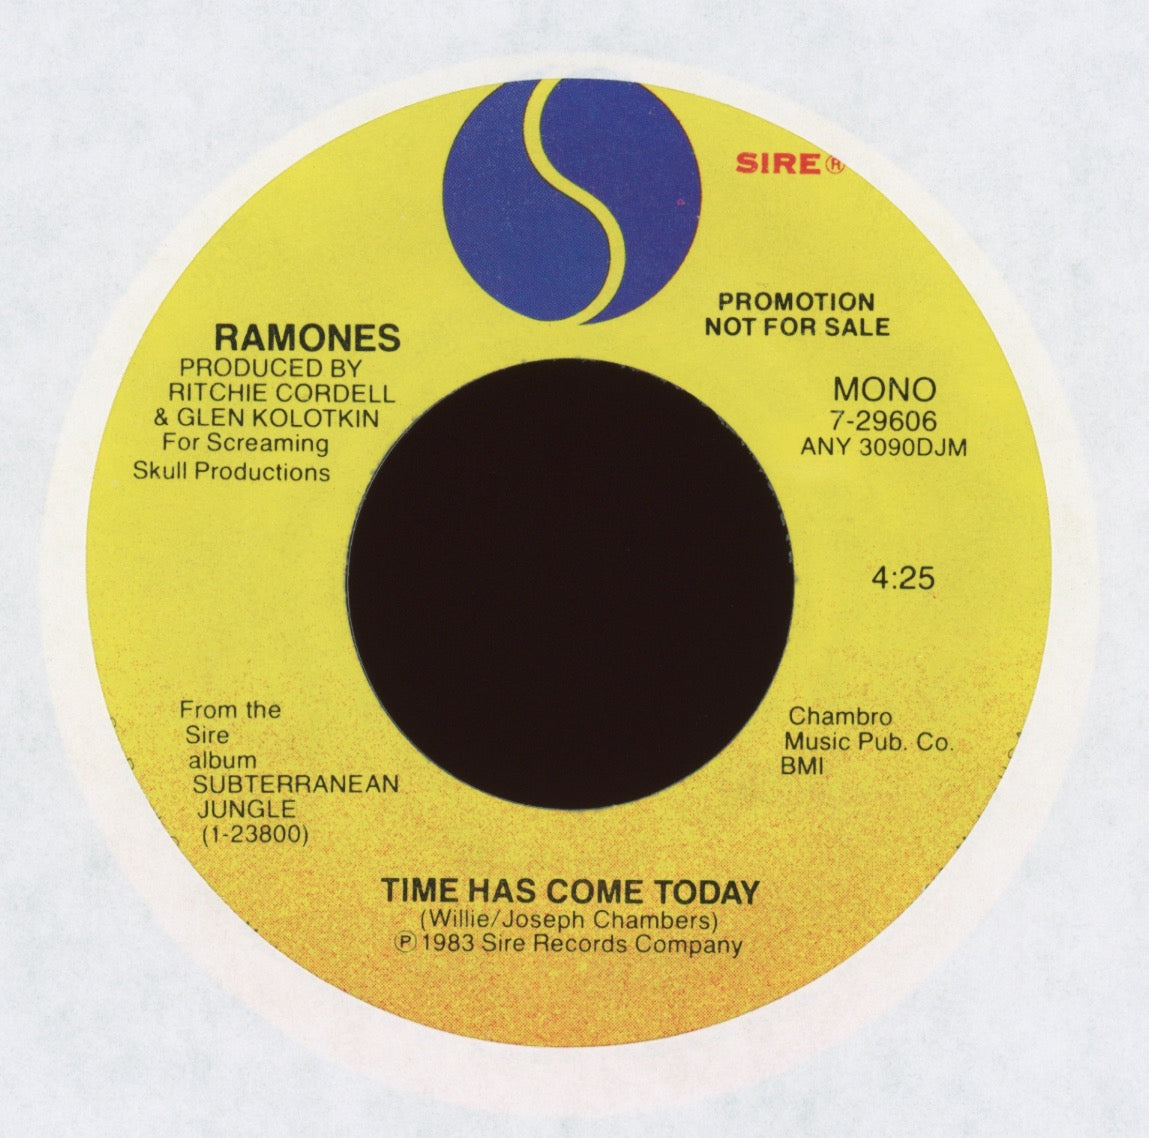 Ramones - Time Has Come Today on Sire Promo